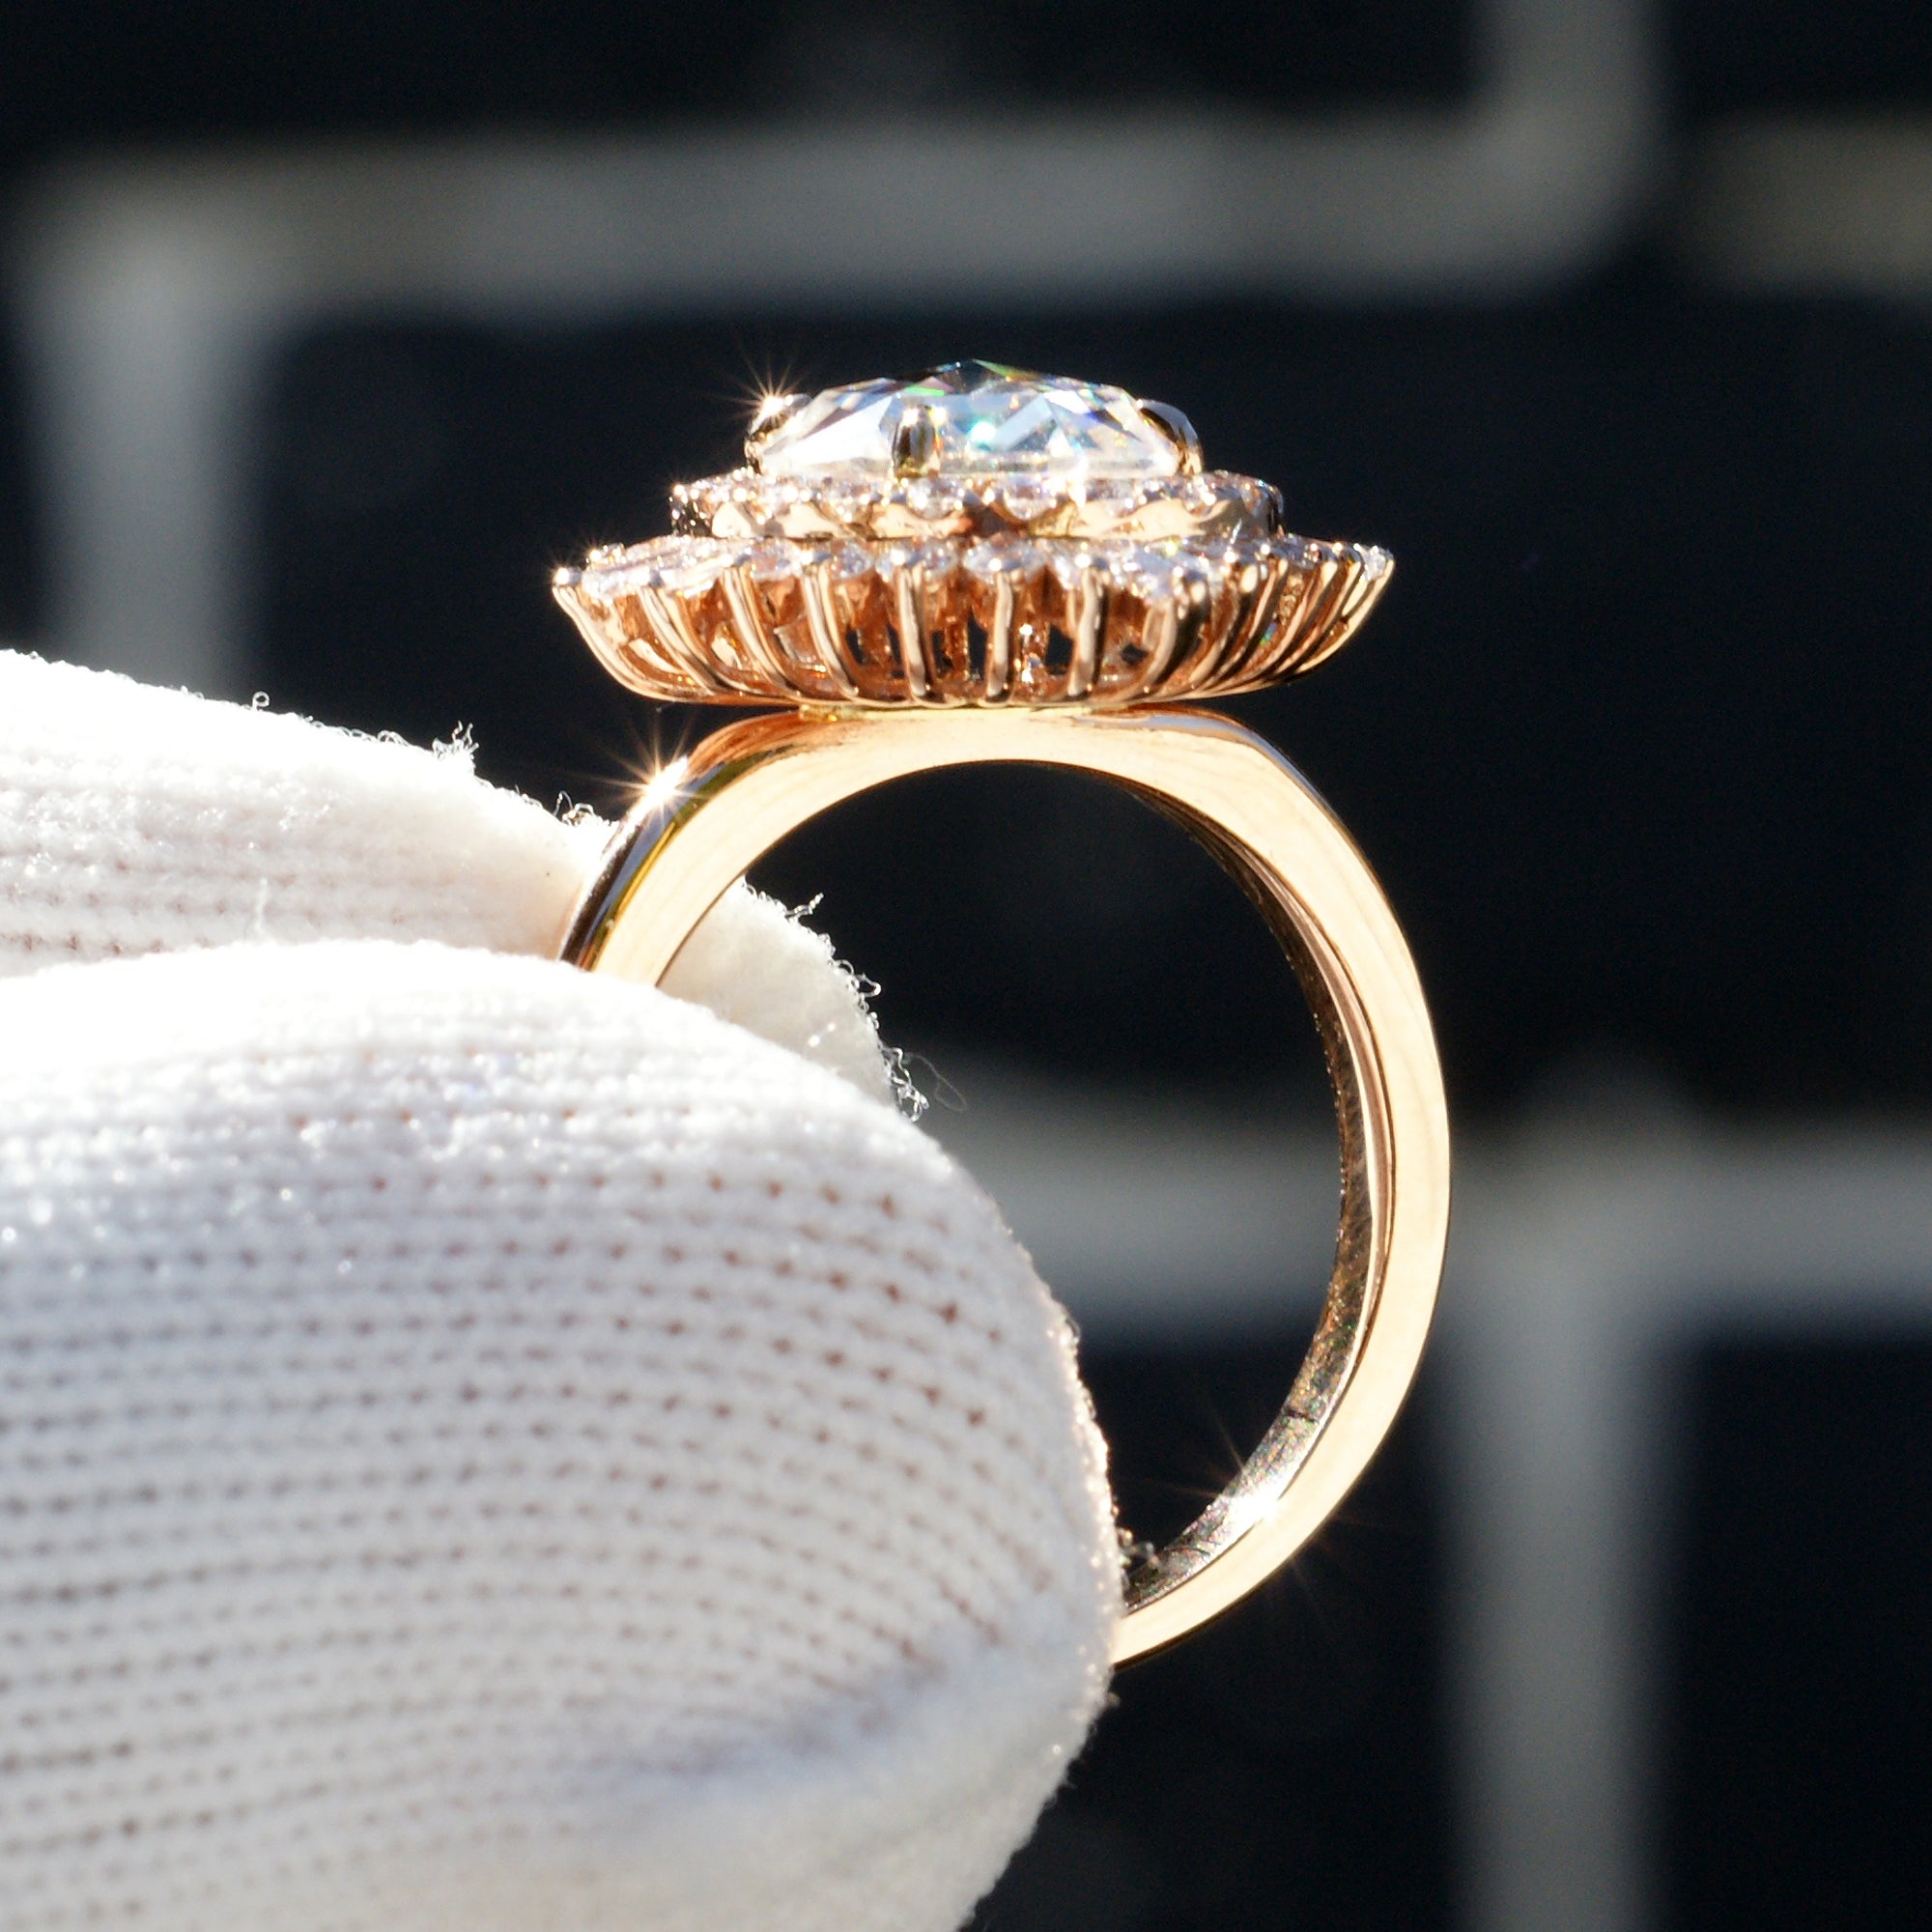 Rose cut moissanite in an art-deco vintage accent rose gold setting with natural side diamonds